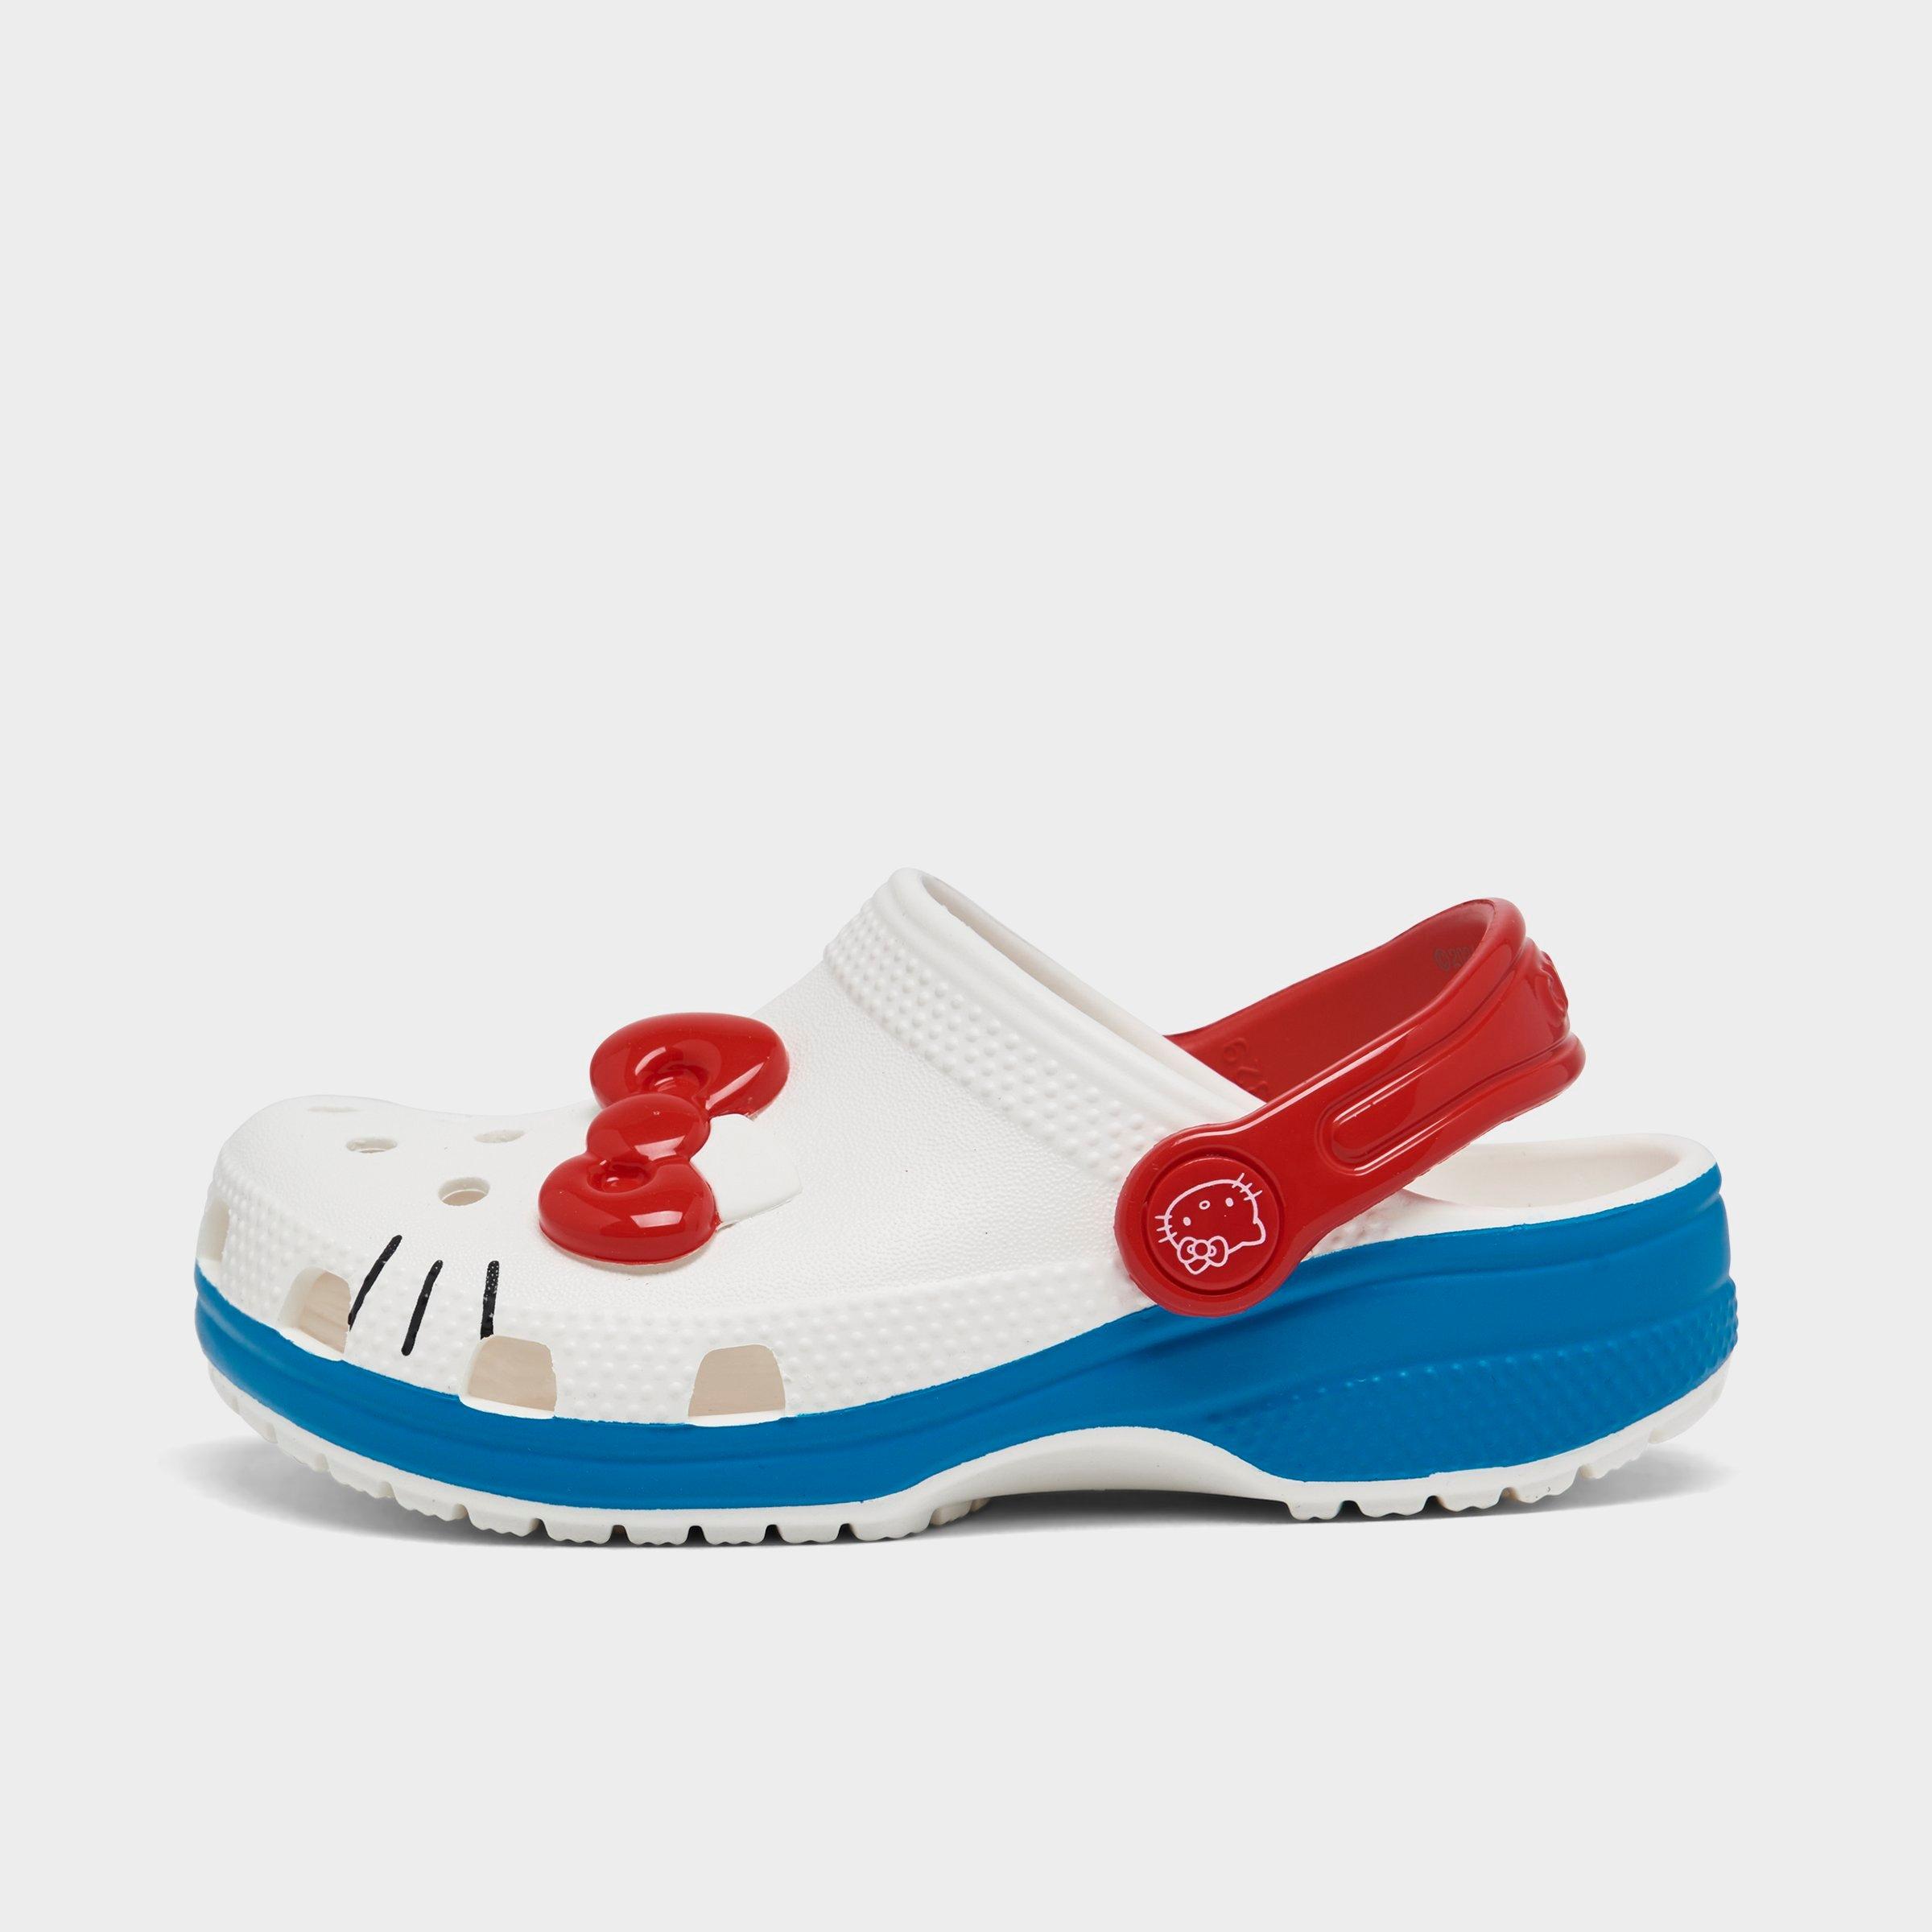 UPC 196265573769 product image for Crocs Girls' Toddler x Hello Kitty Classic Clog Shoes in White/White Size 10.0 | upcitemdb.com